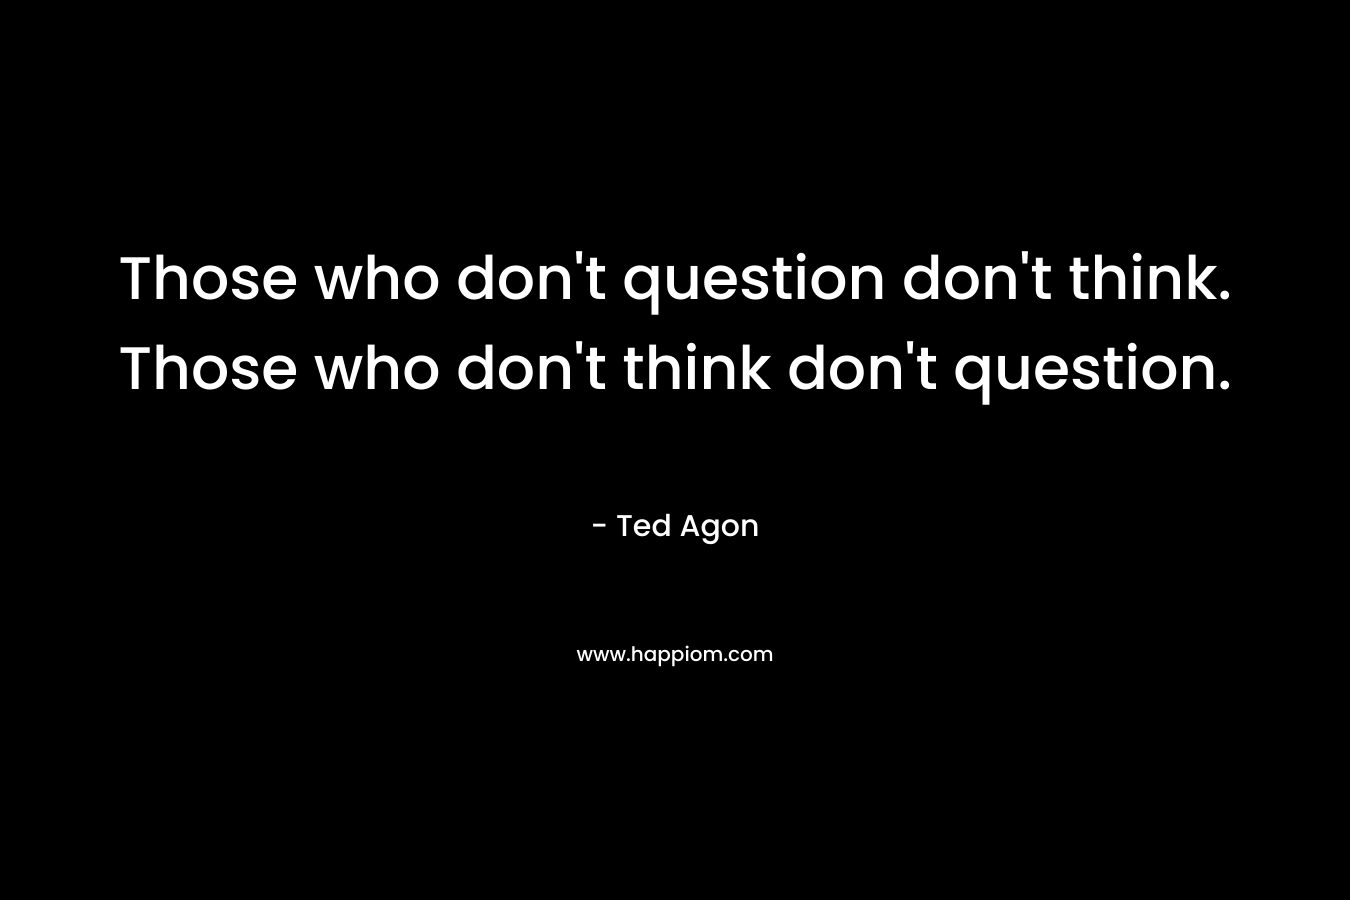 Those who don't question don't think. Those who don't think don't question.